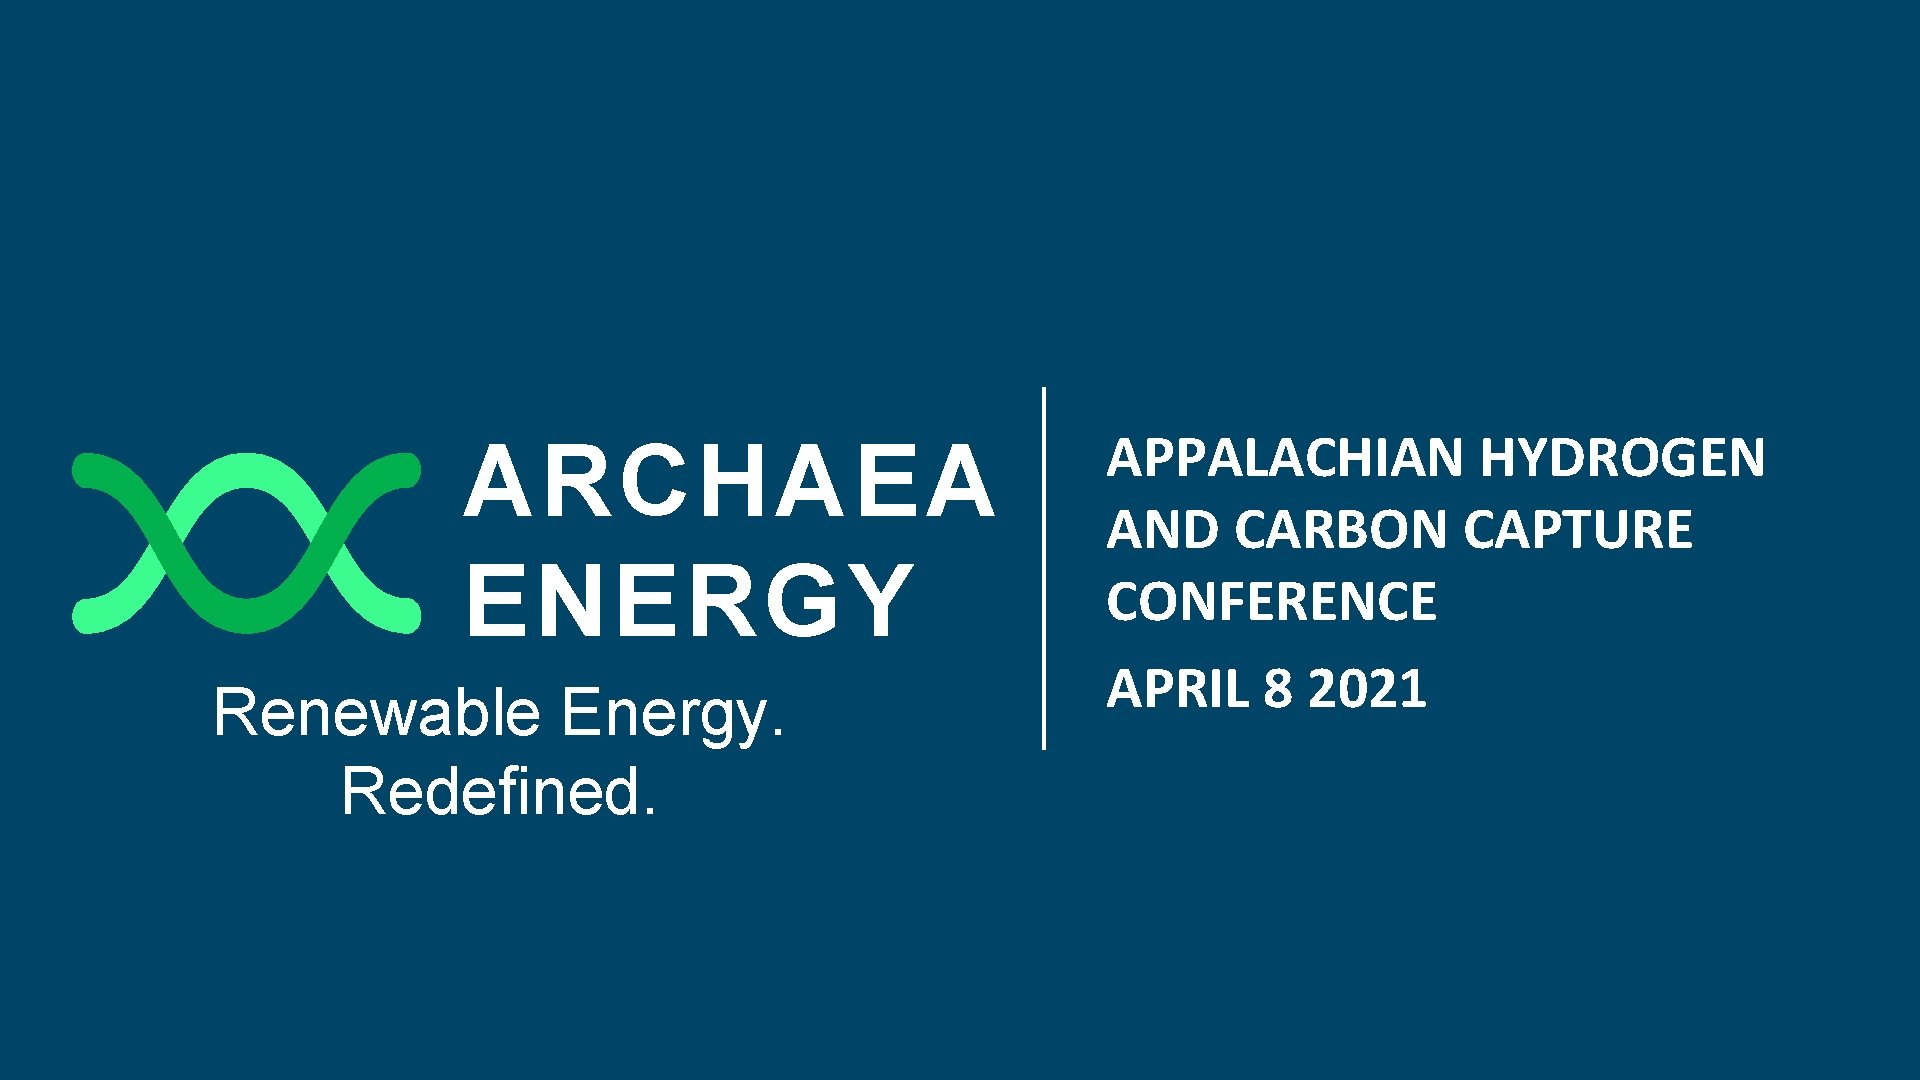 ARCHAEA ENERGY Renewable Energy. Redefined. 1 APPALACHIAN HYDROGEN AND CARBON CAPTURE CONFERENCE APRIL 8